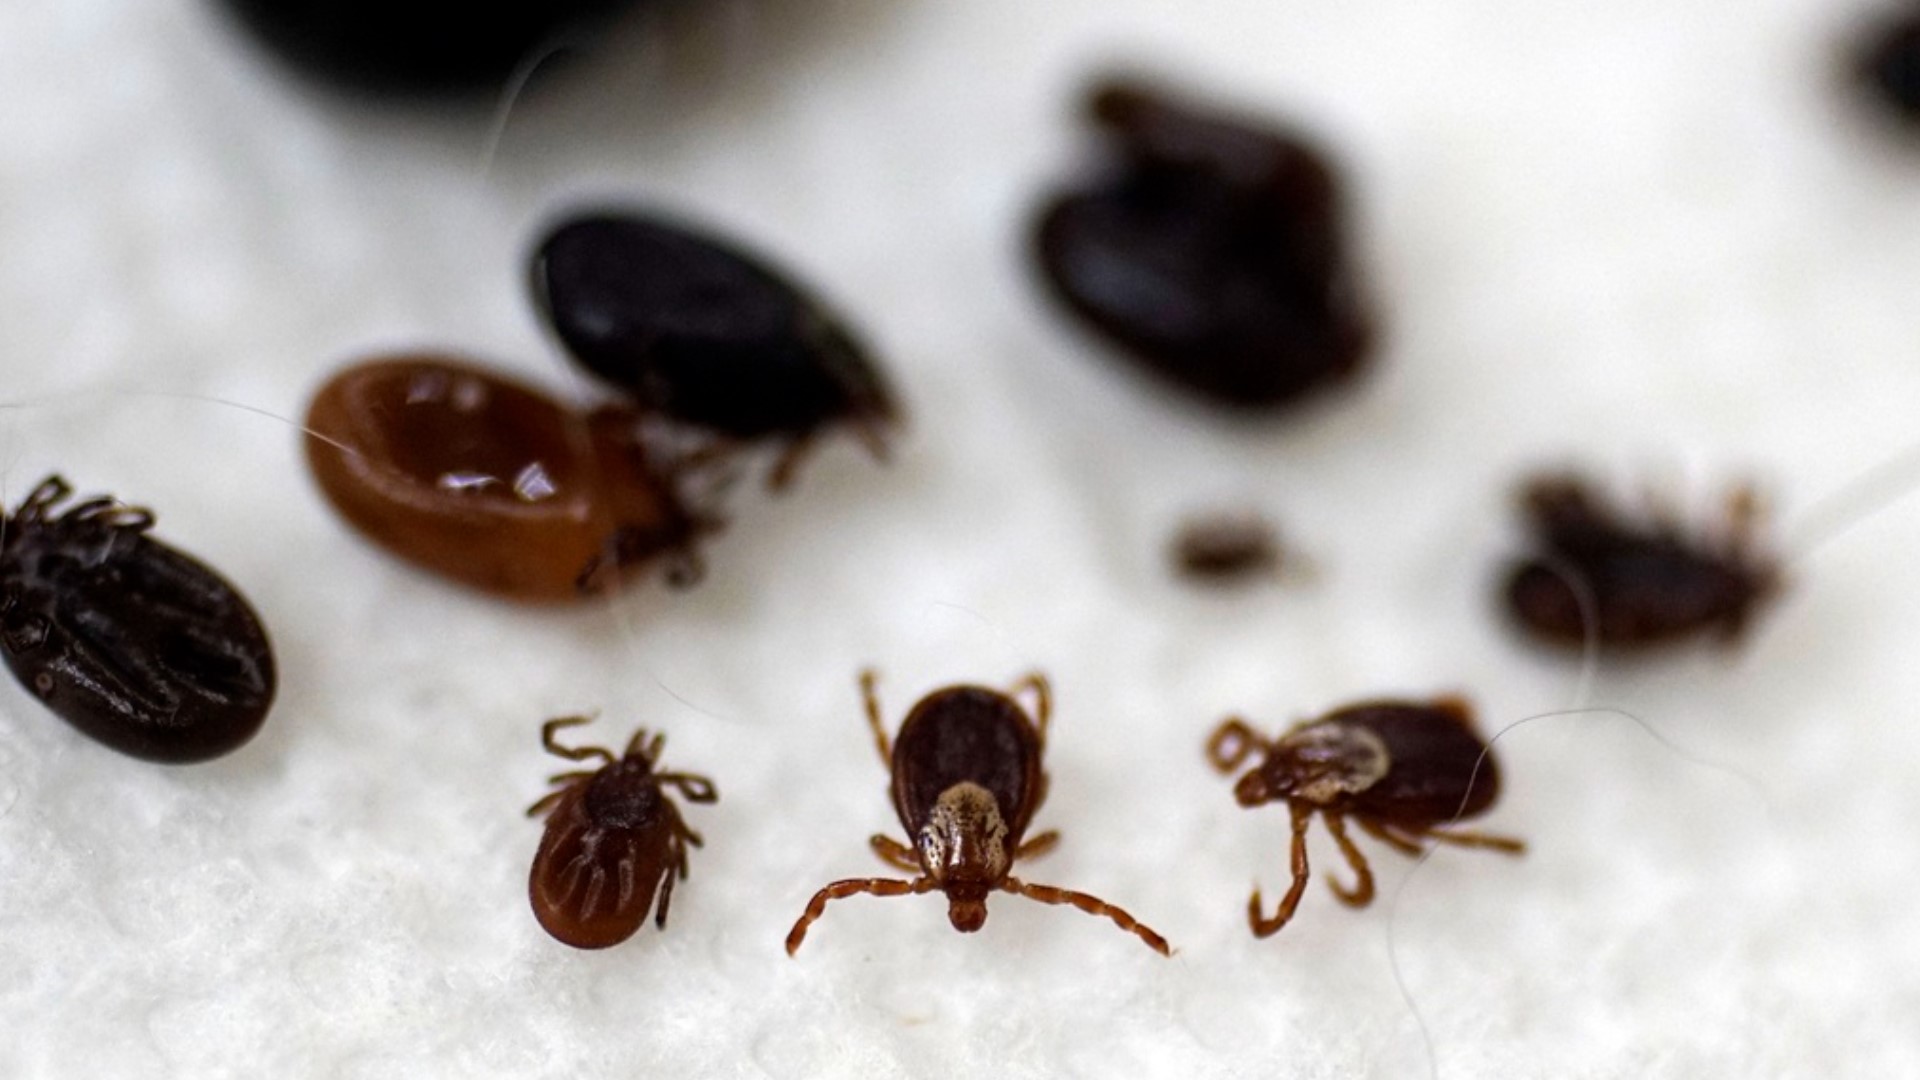 Mainers are being urged to take precautions against deer ticks carrying diseases.